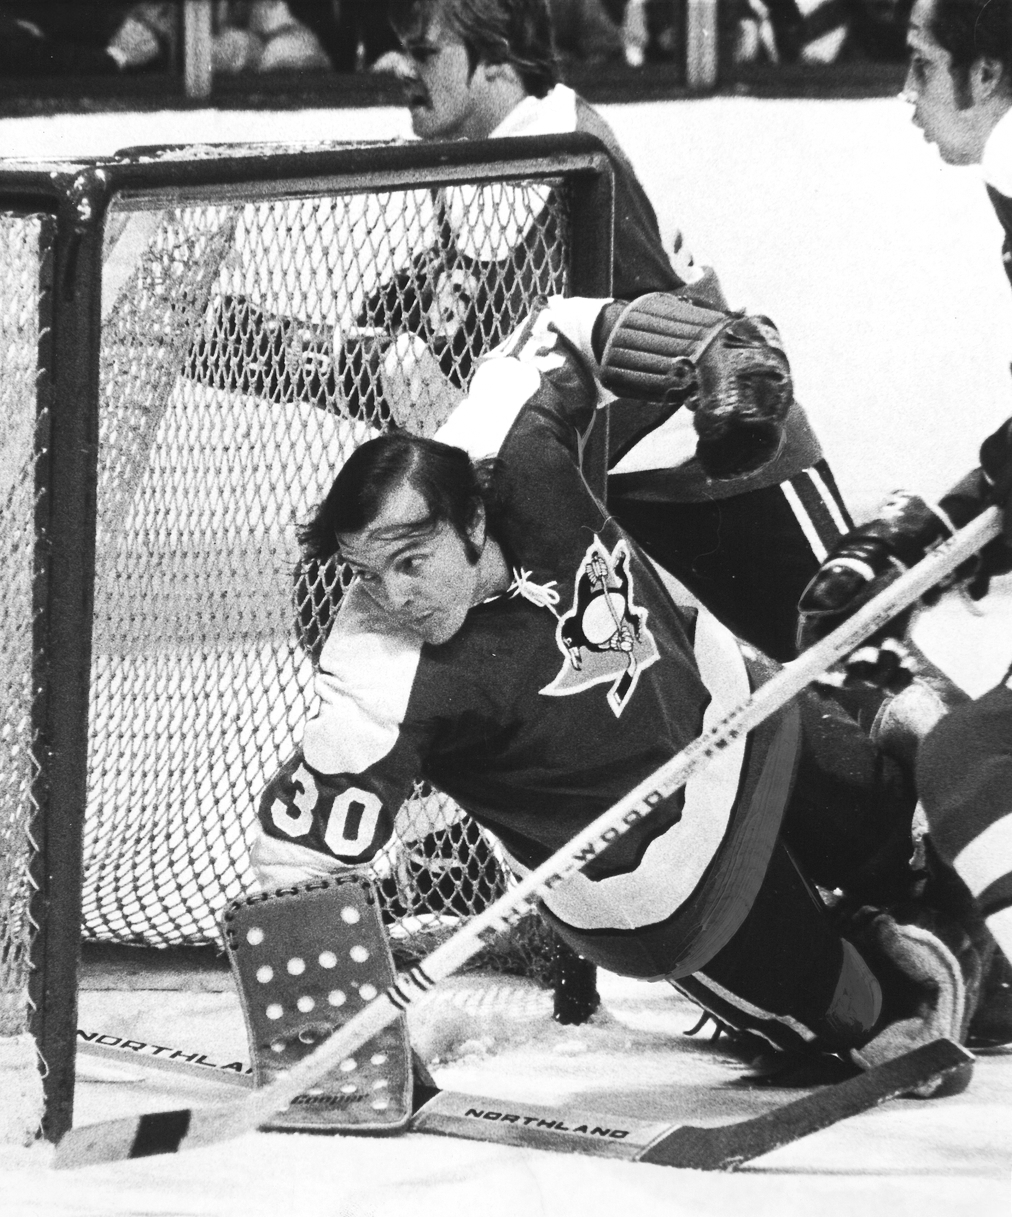 Andy Brown, the last goalie to not wear a mask in the NHL.